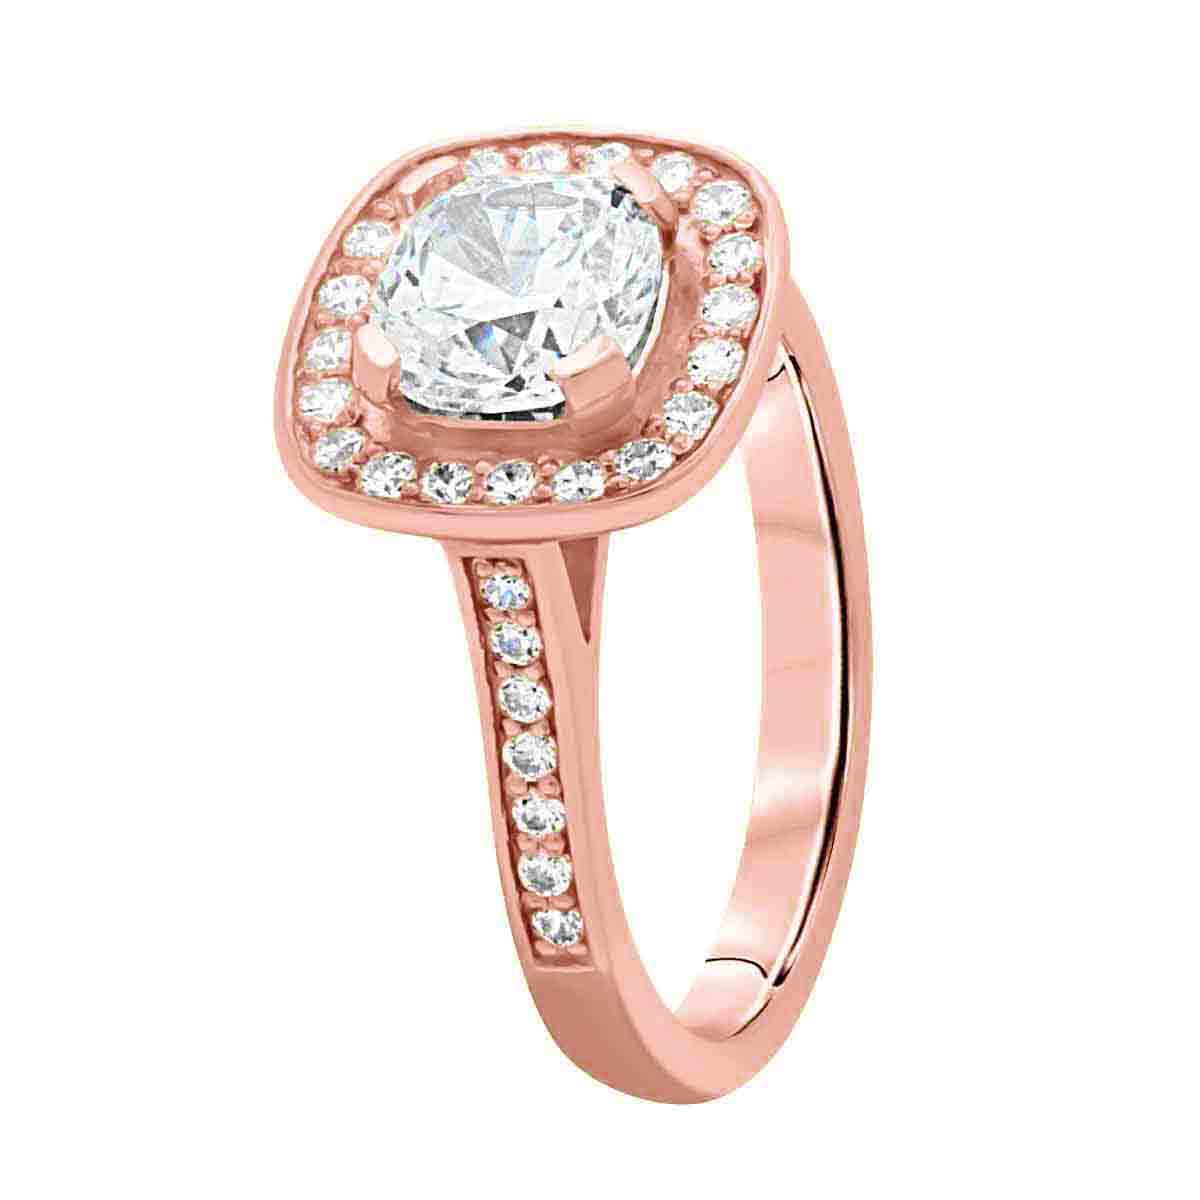 Cushion Cut Diamond Antique Diamond Ring in rose gold in angled position